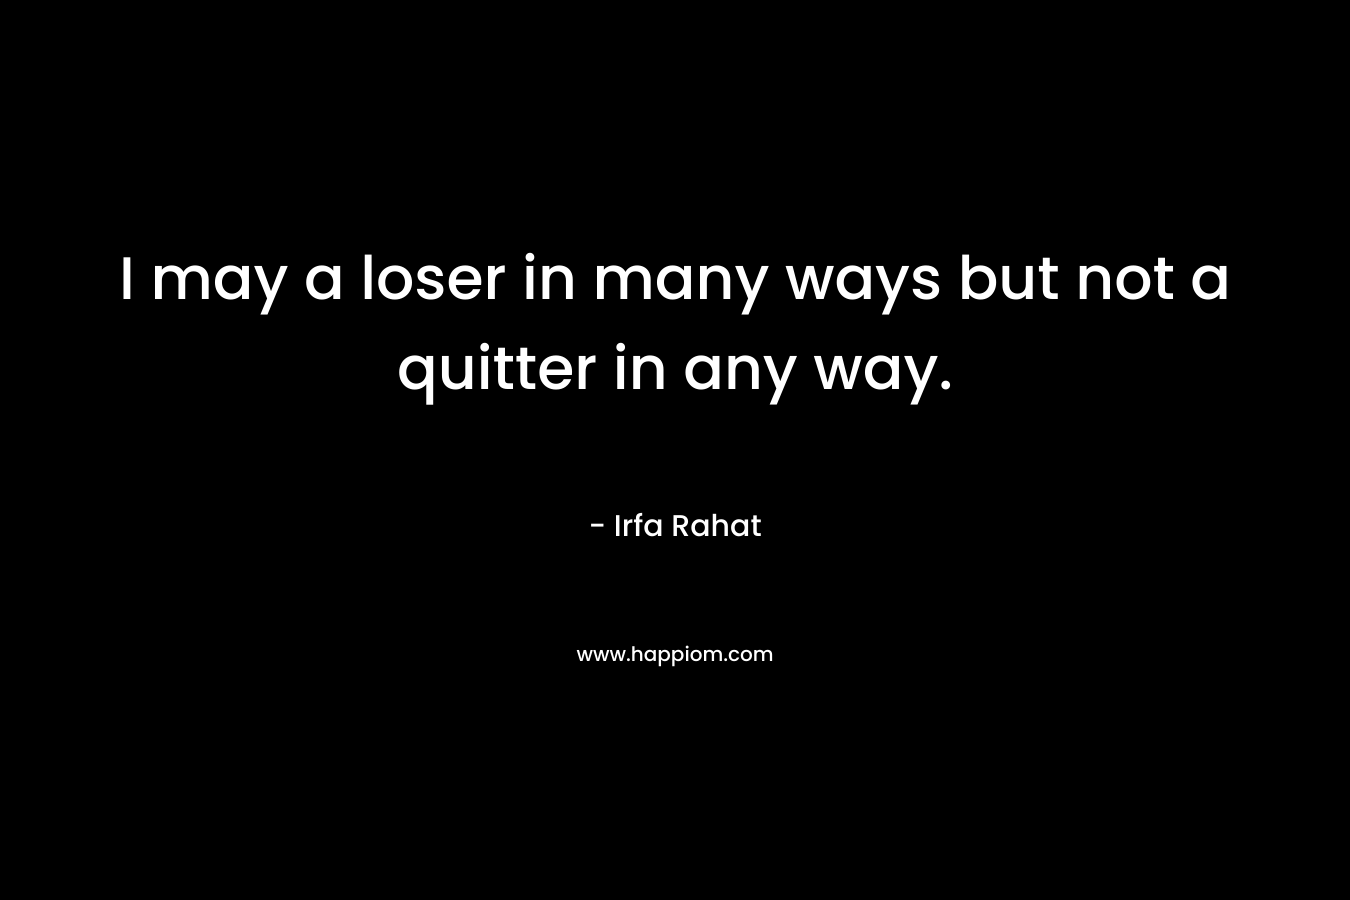 I may a loser in many ways but not a quitter in any way. – Irfa Rahat